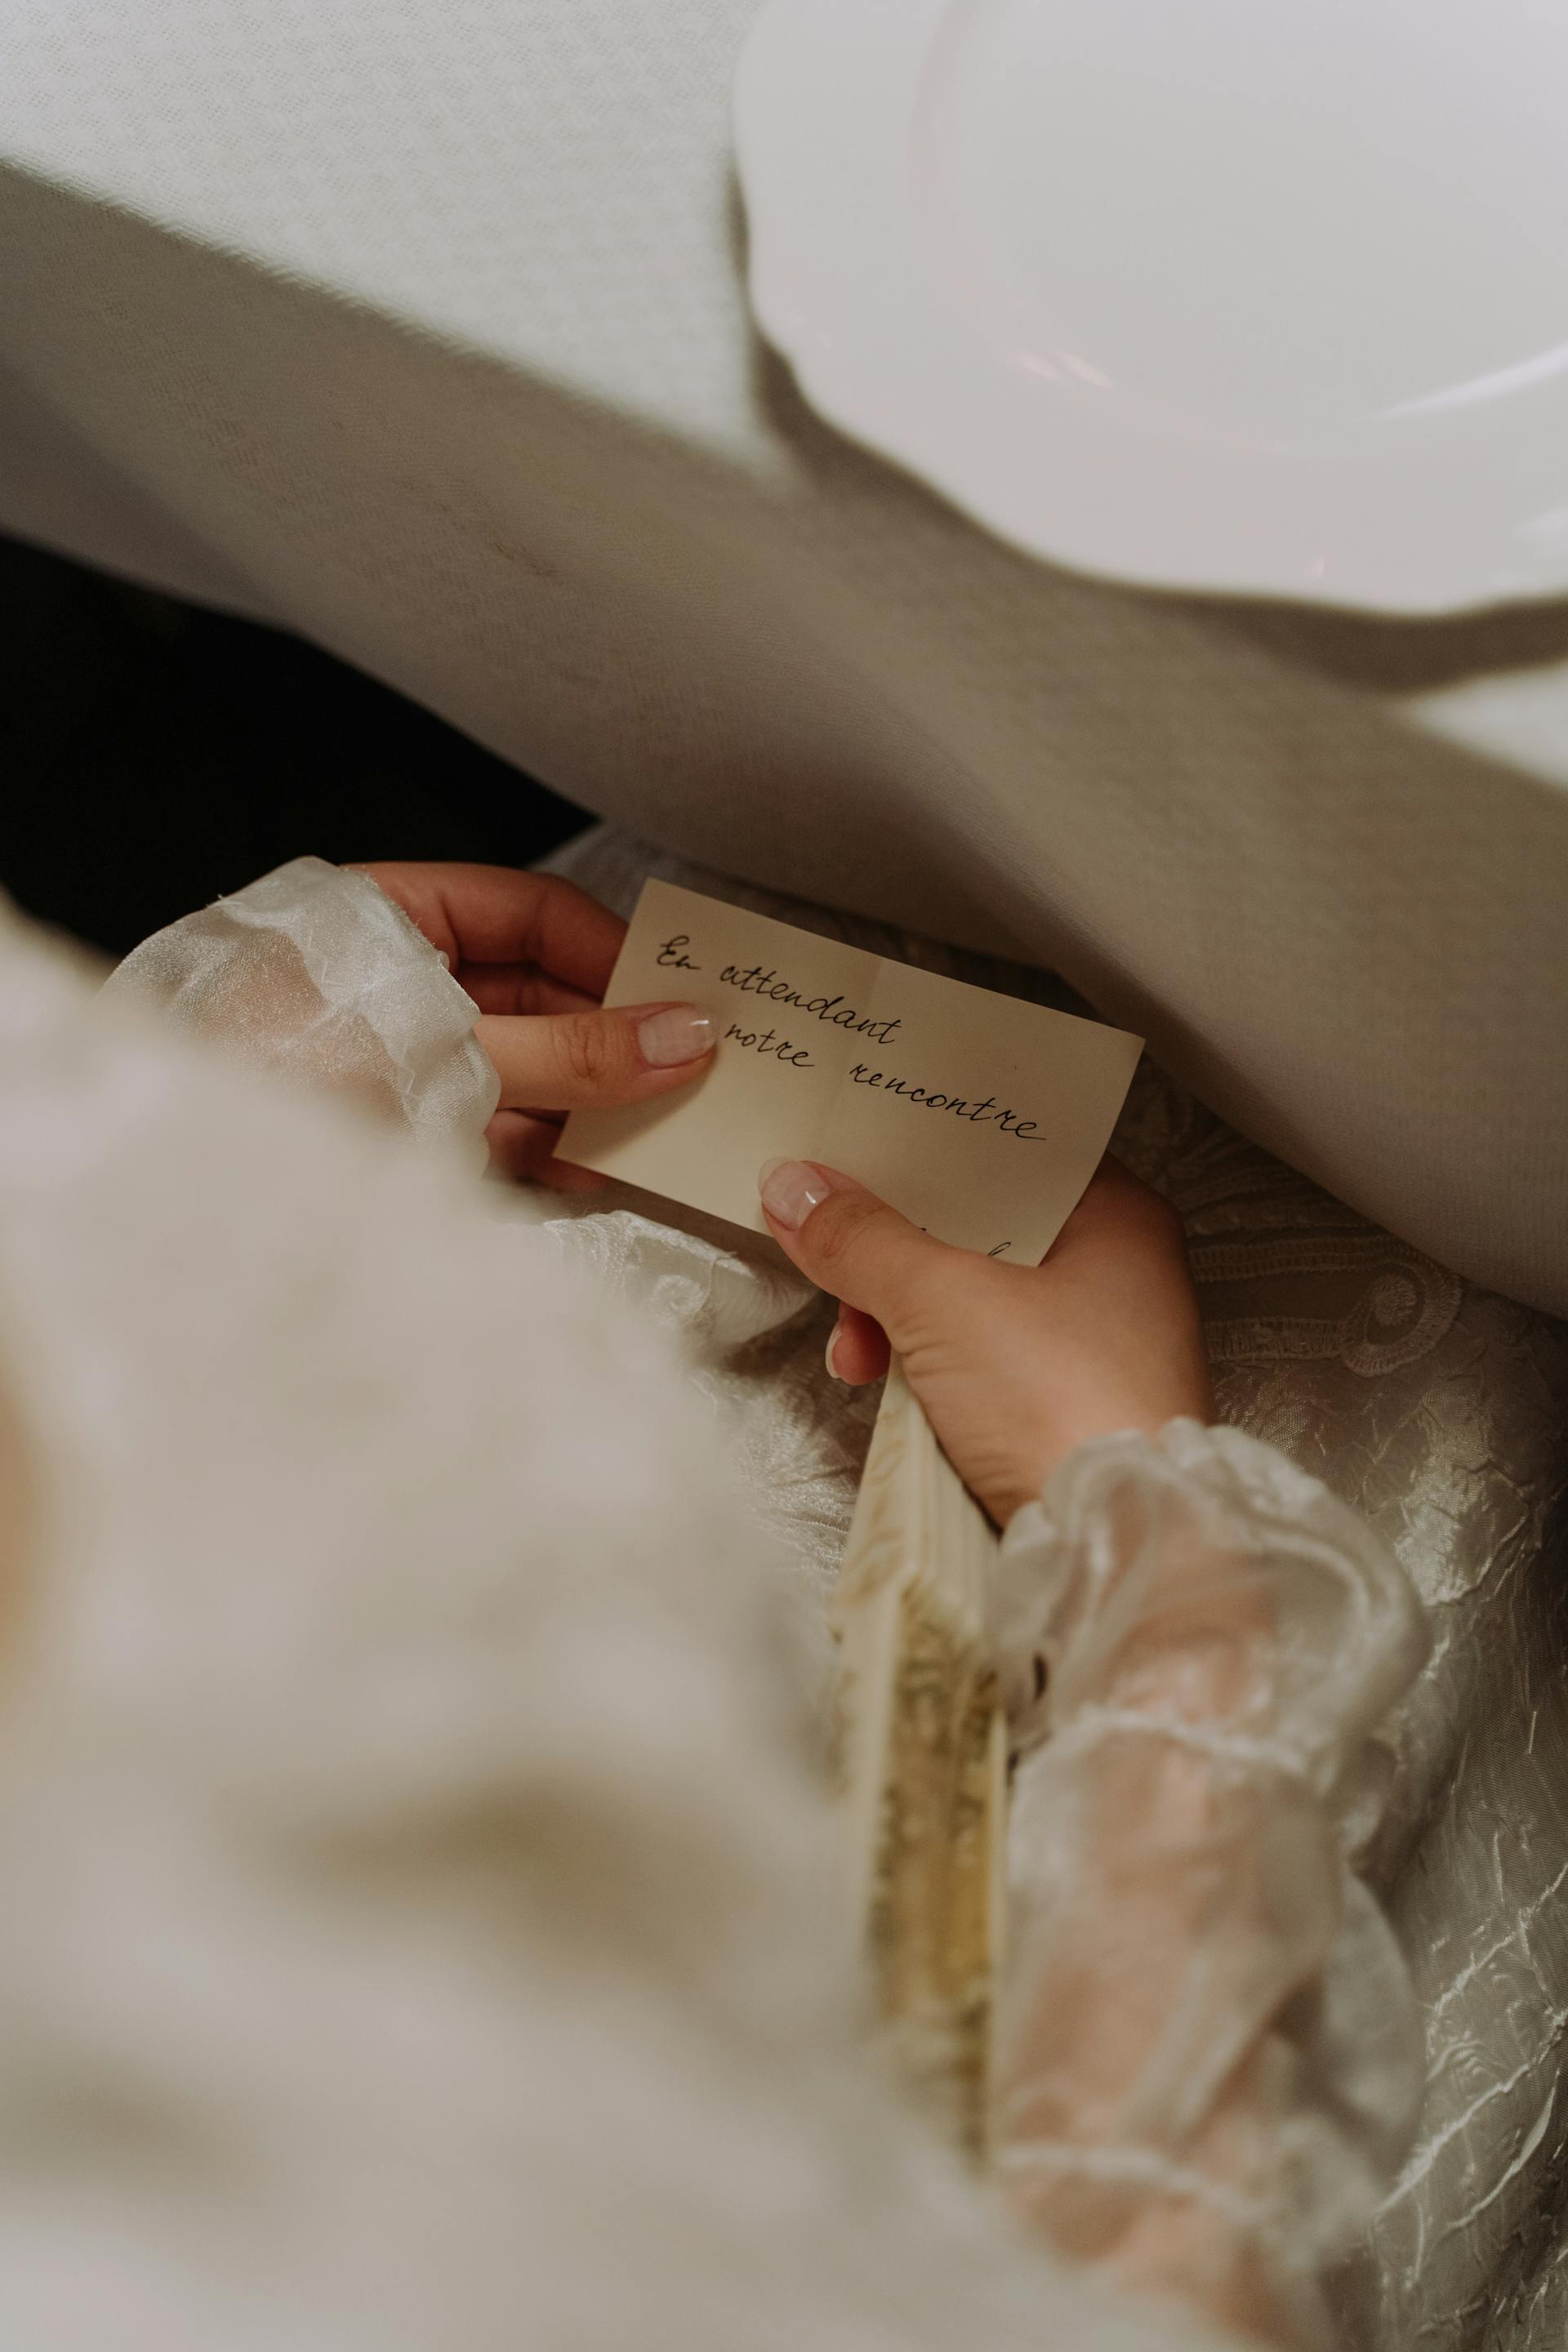 A close-up shot of a woman holding a note | Source: Pexels